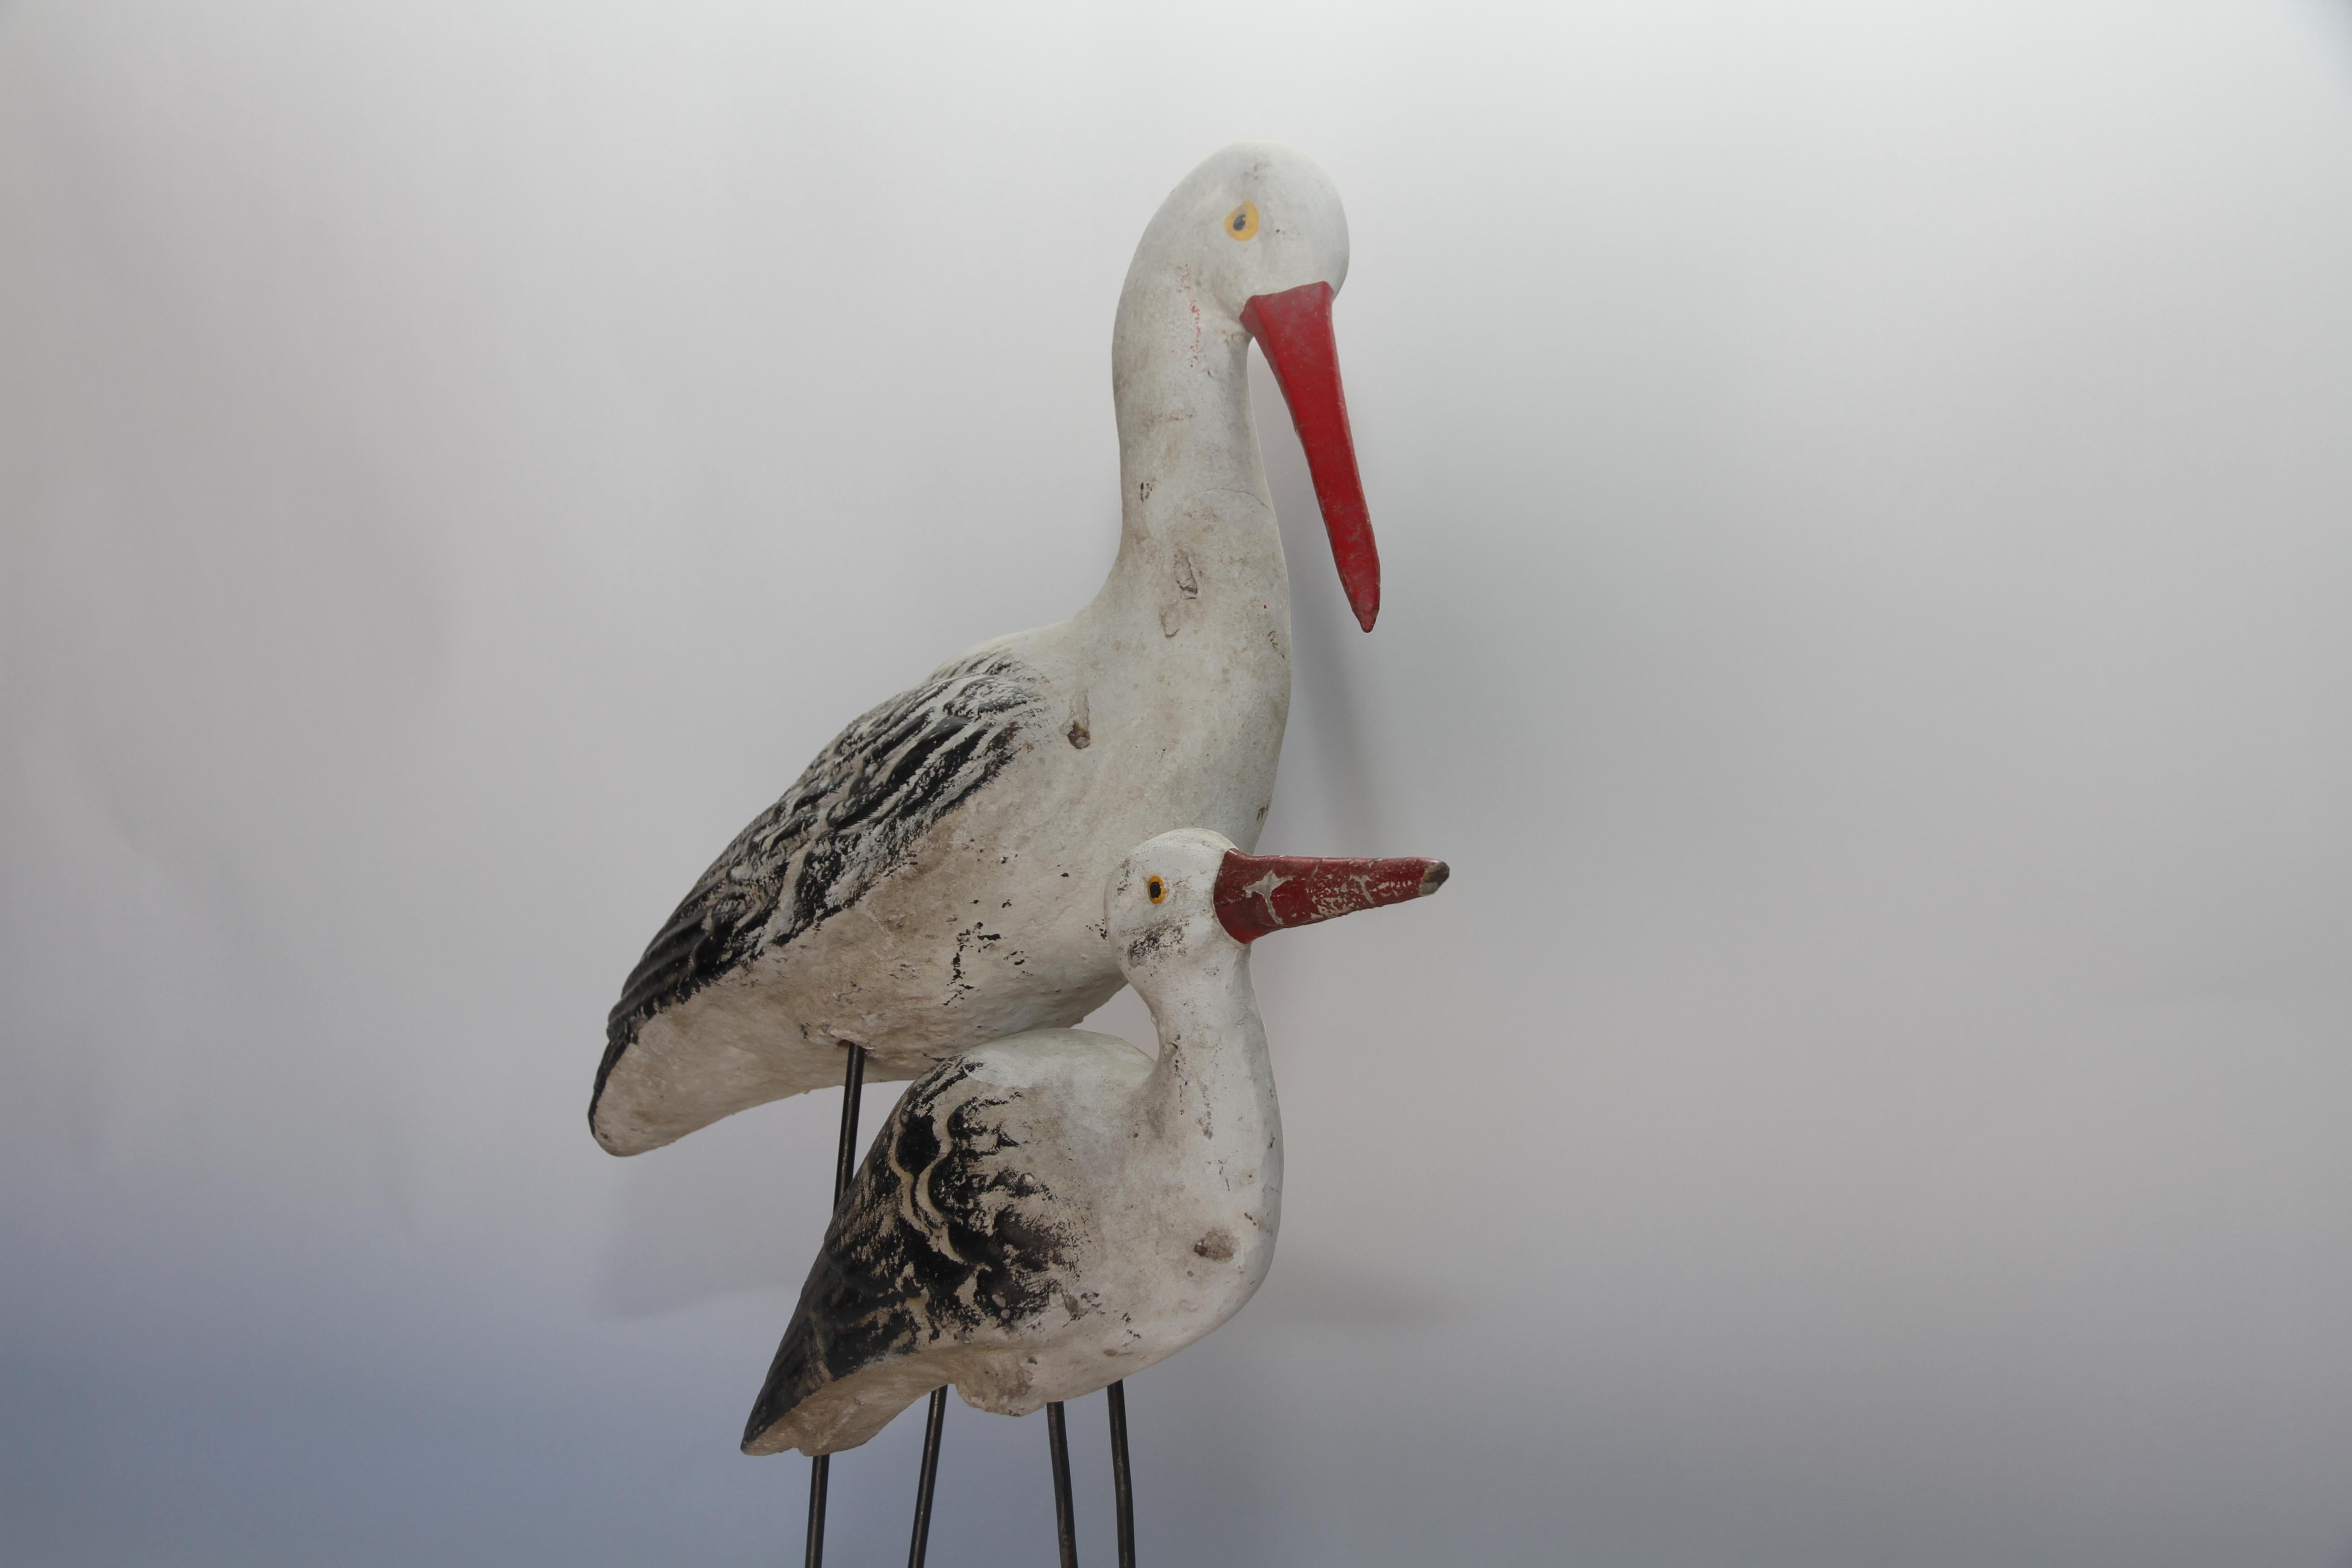 A vintage piece consisting of two concrete shore birds with iron legs mounted on a concrete stand, a lovely addition for inside or outdoors. Found in France, this piece will add a bit of whimsy to your home, beach house or garden.